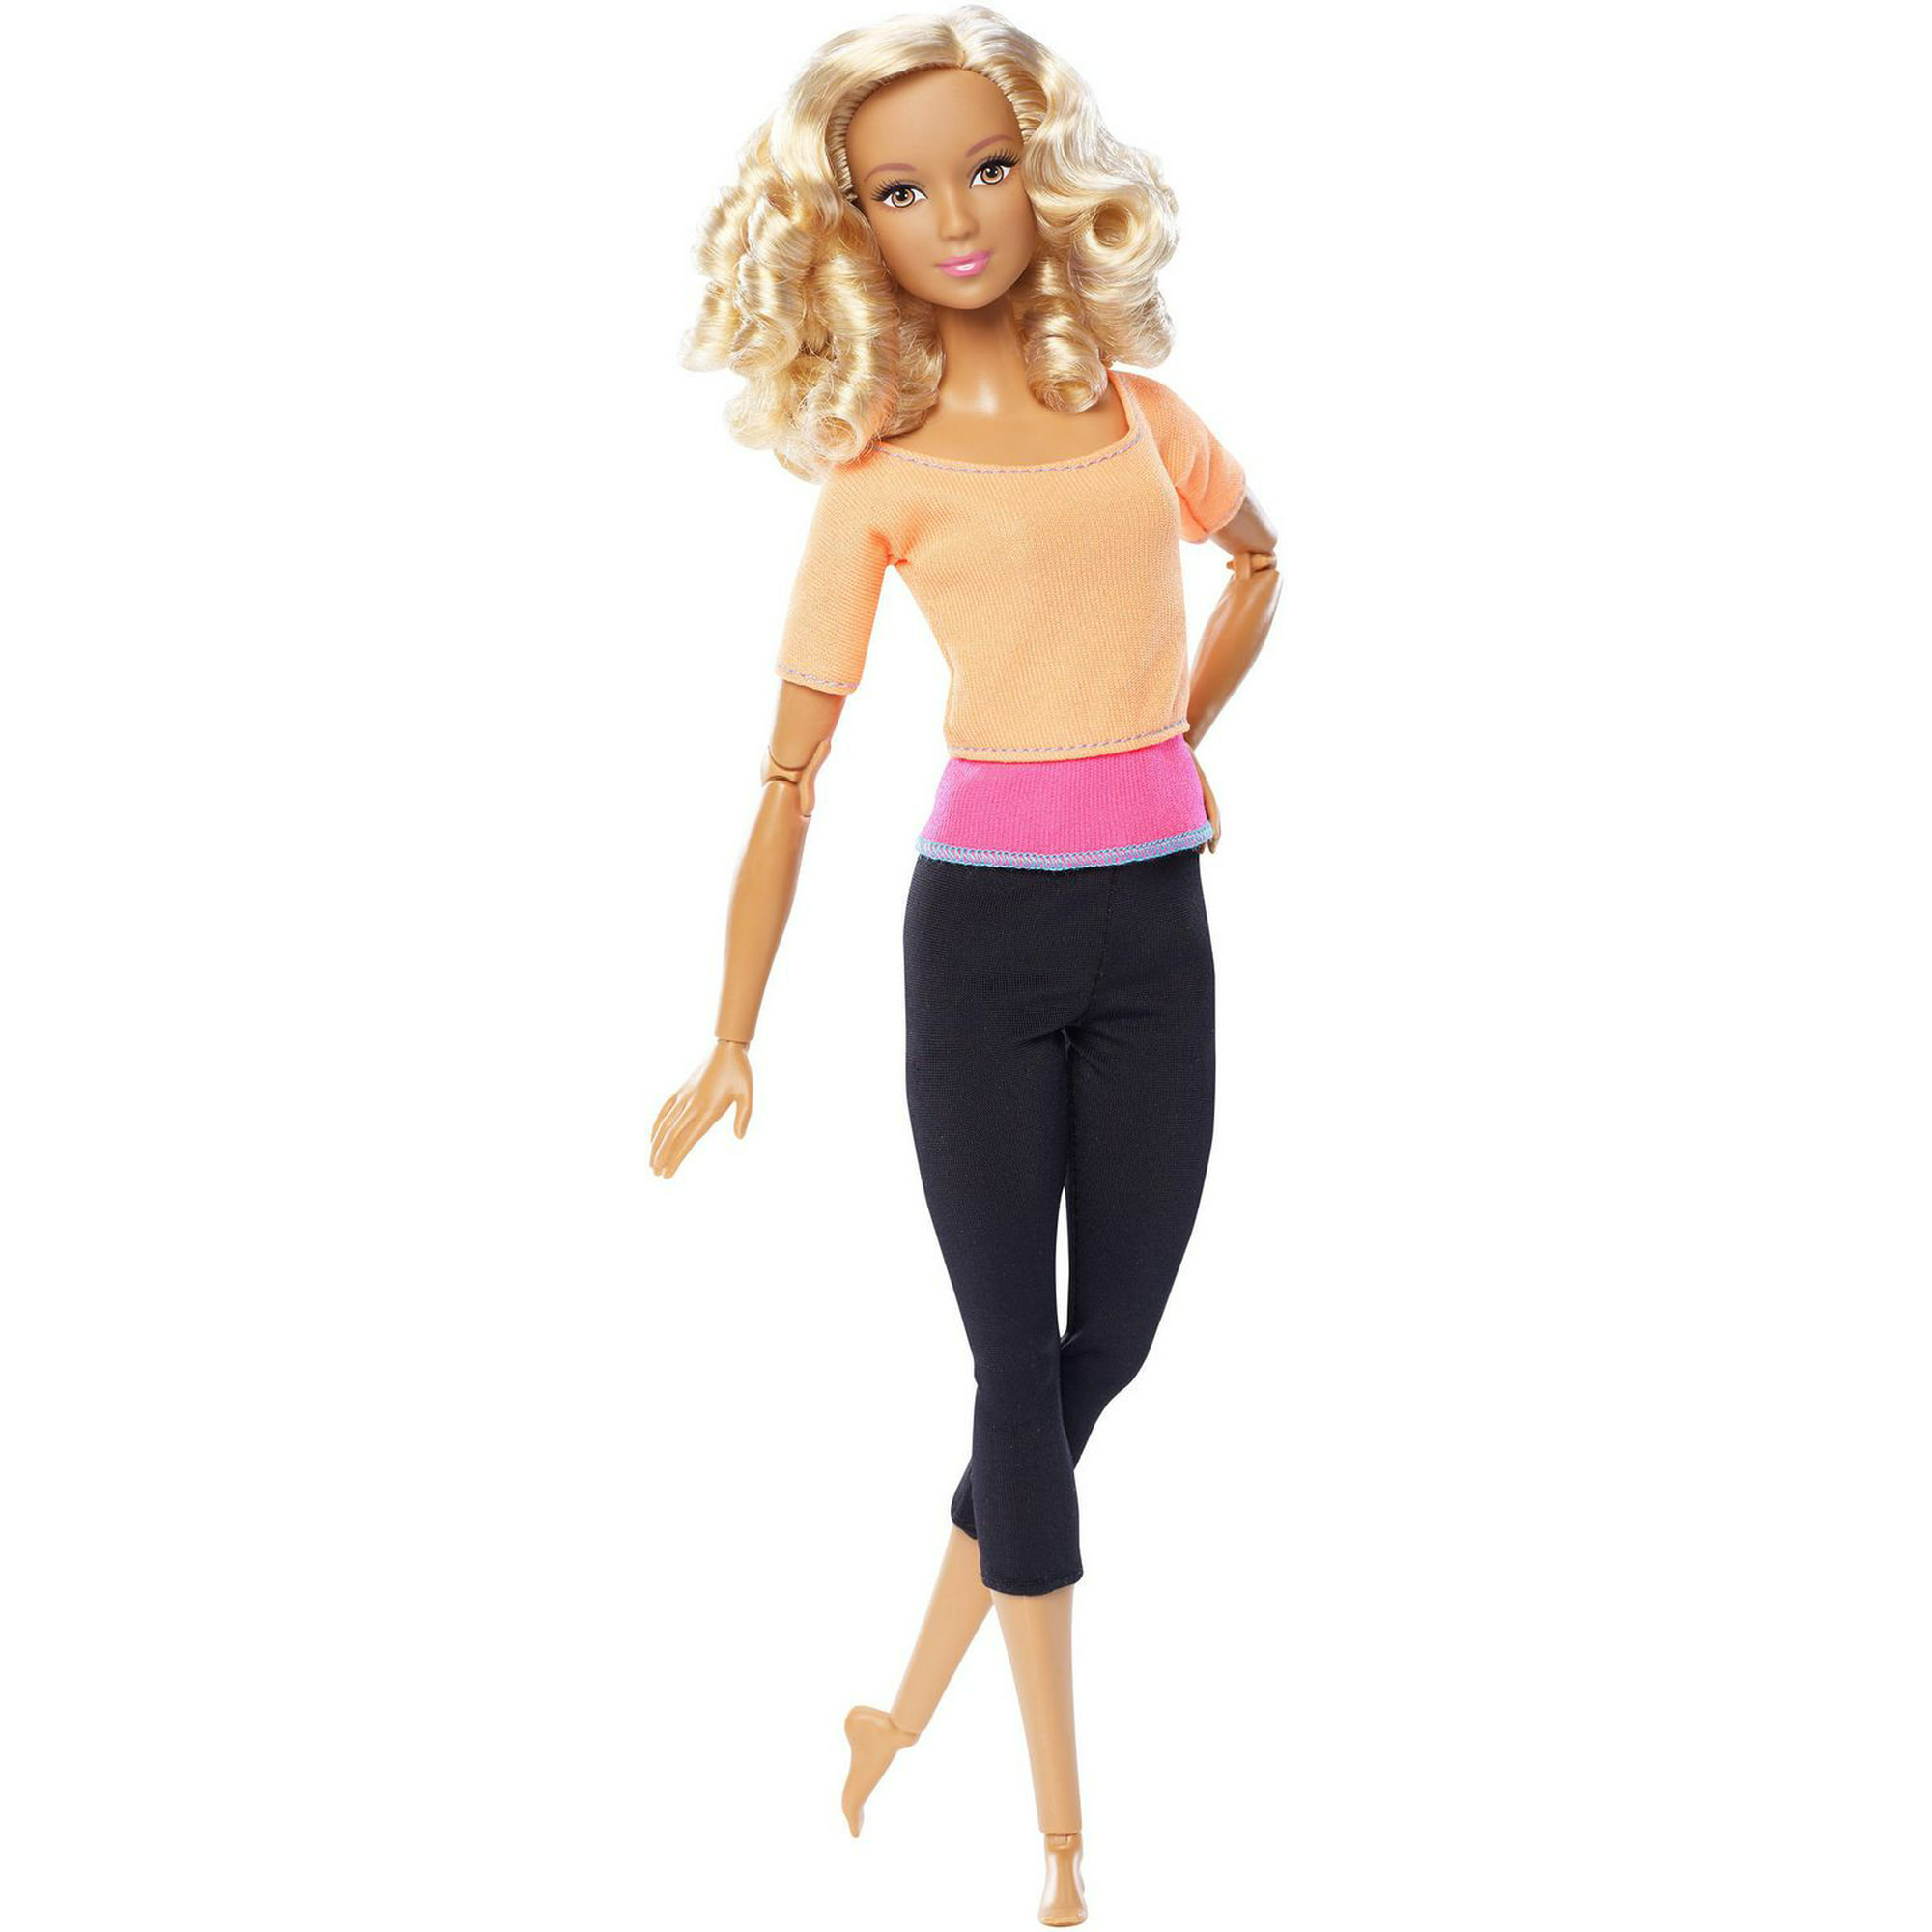 Barbie Made to Move Barbie Doll, Pink Top and Made to Move Barbie